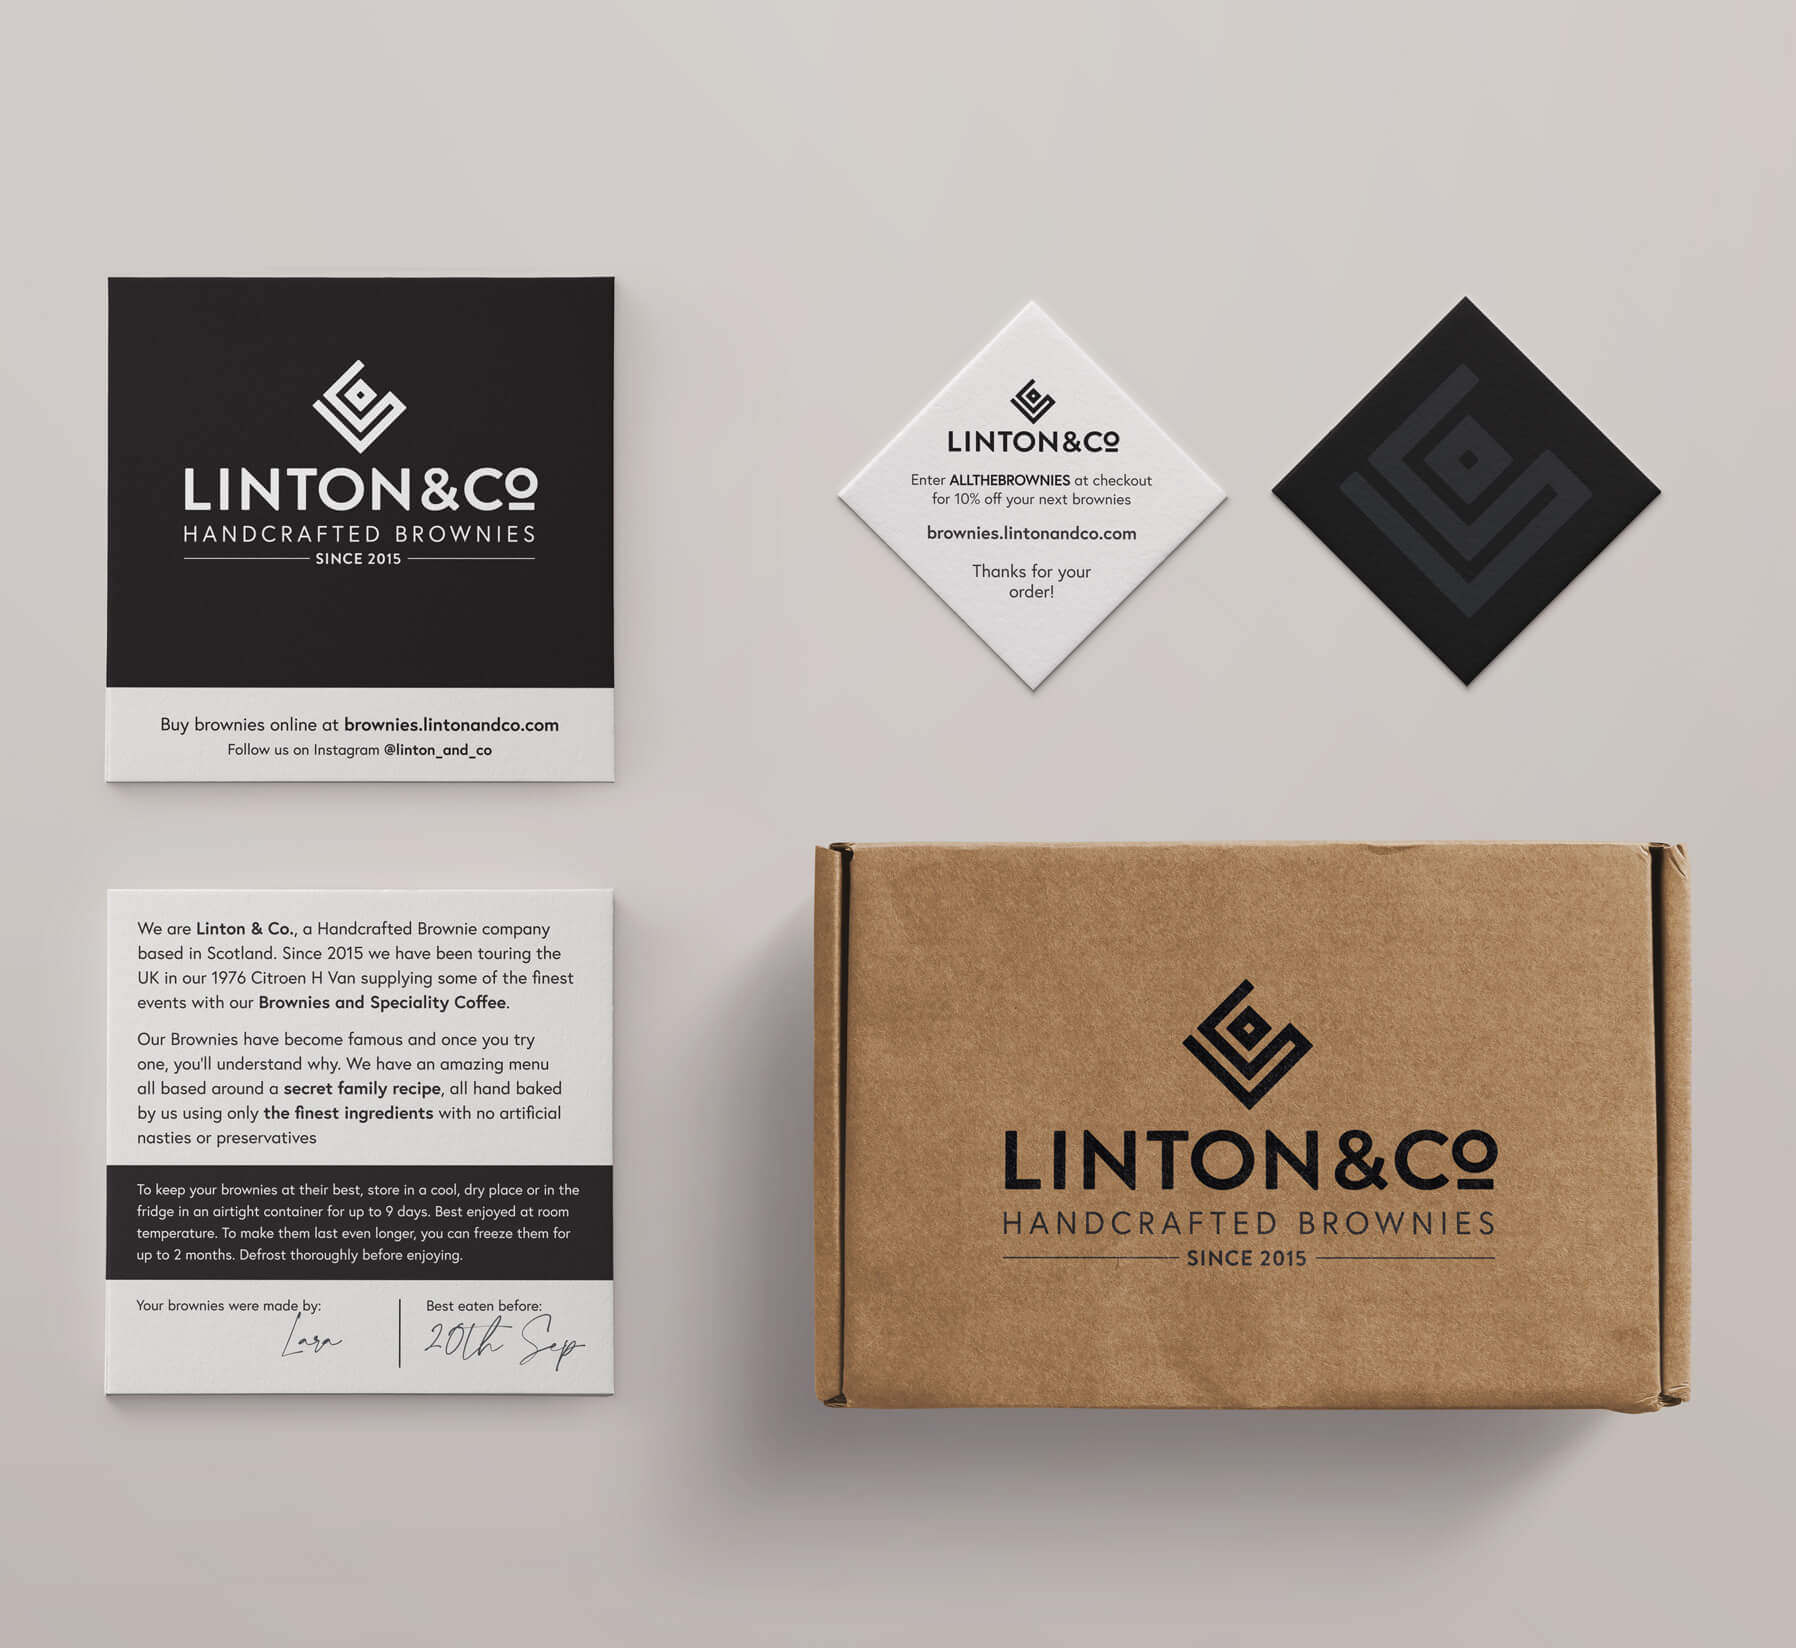 Linton and co brownie packaging design